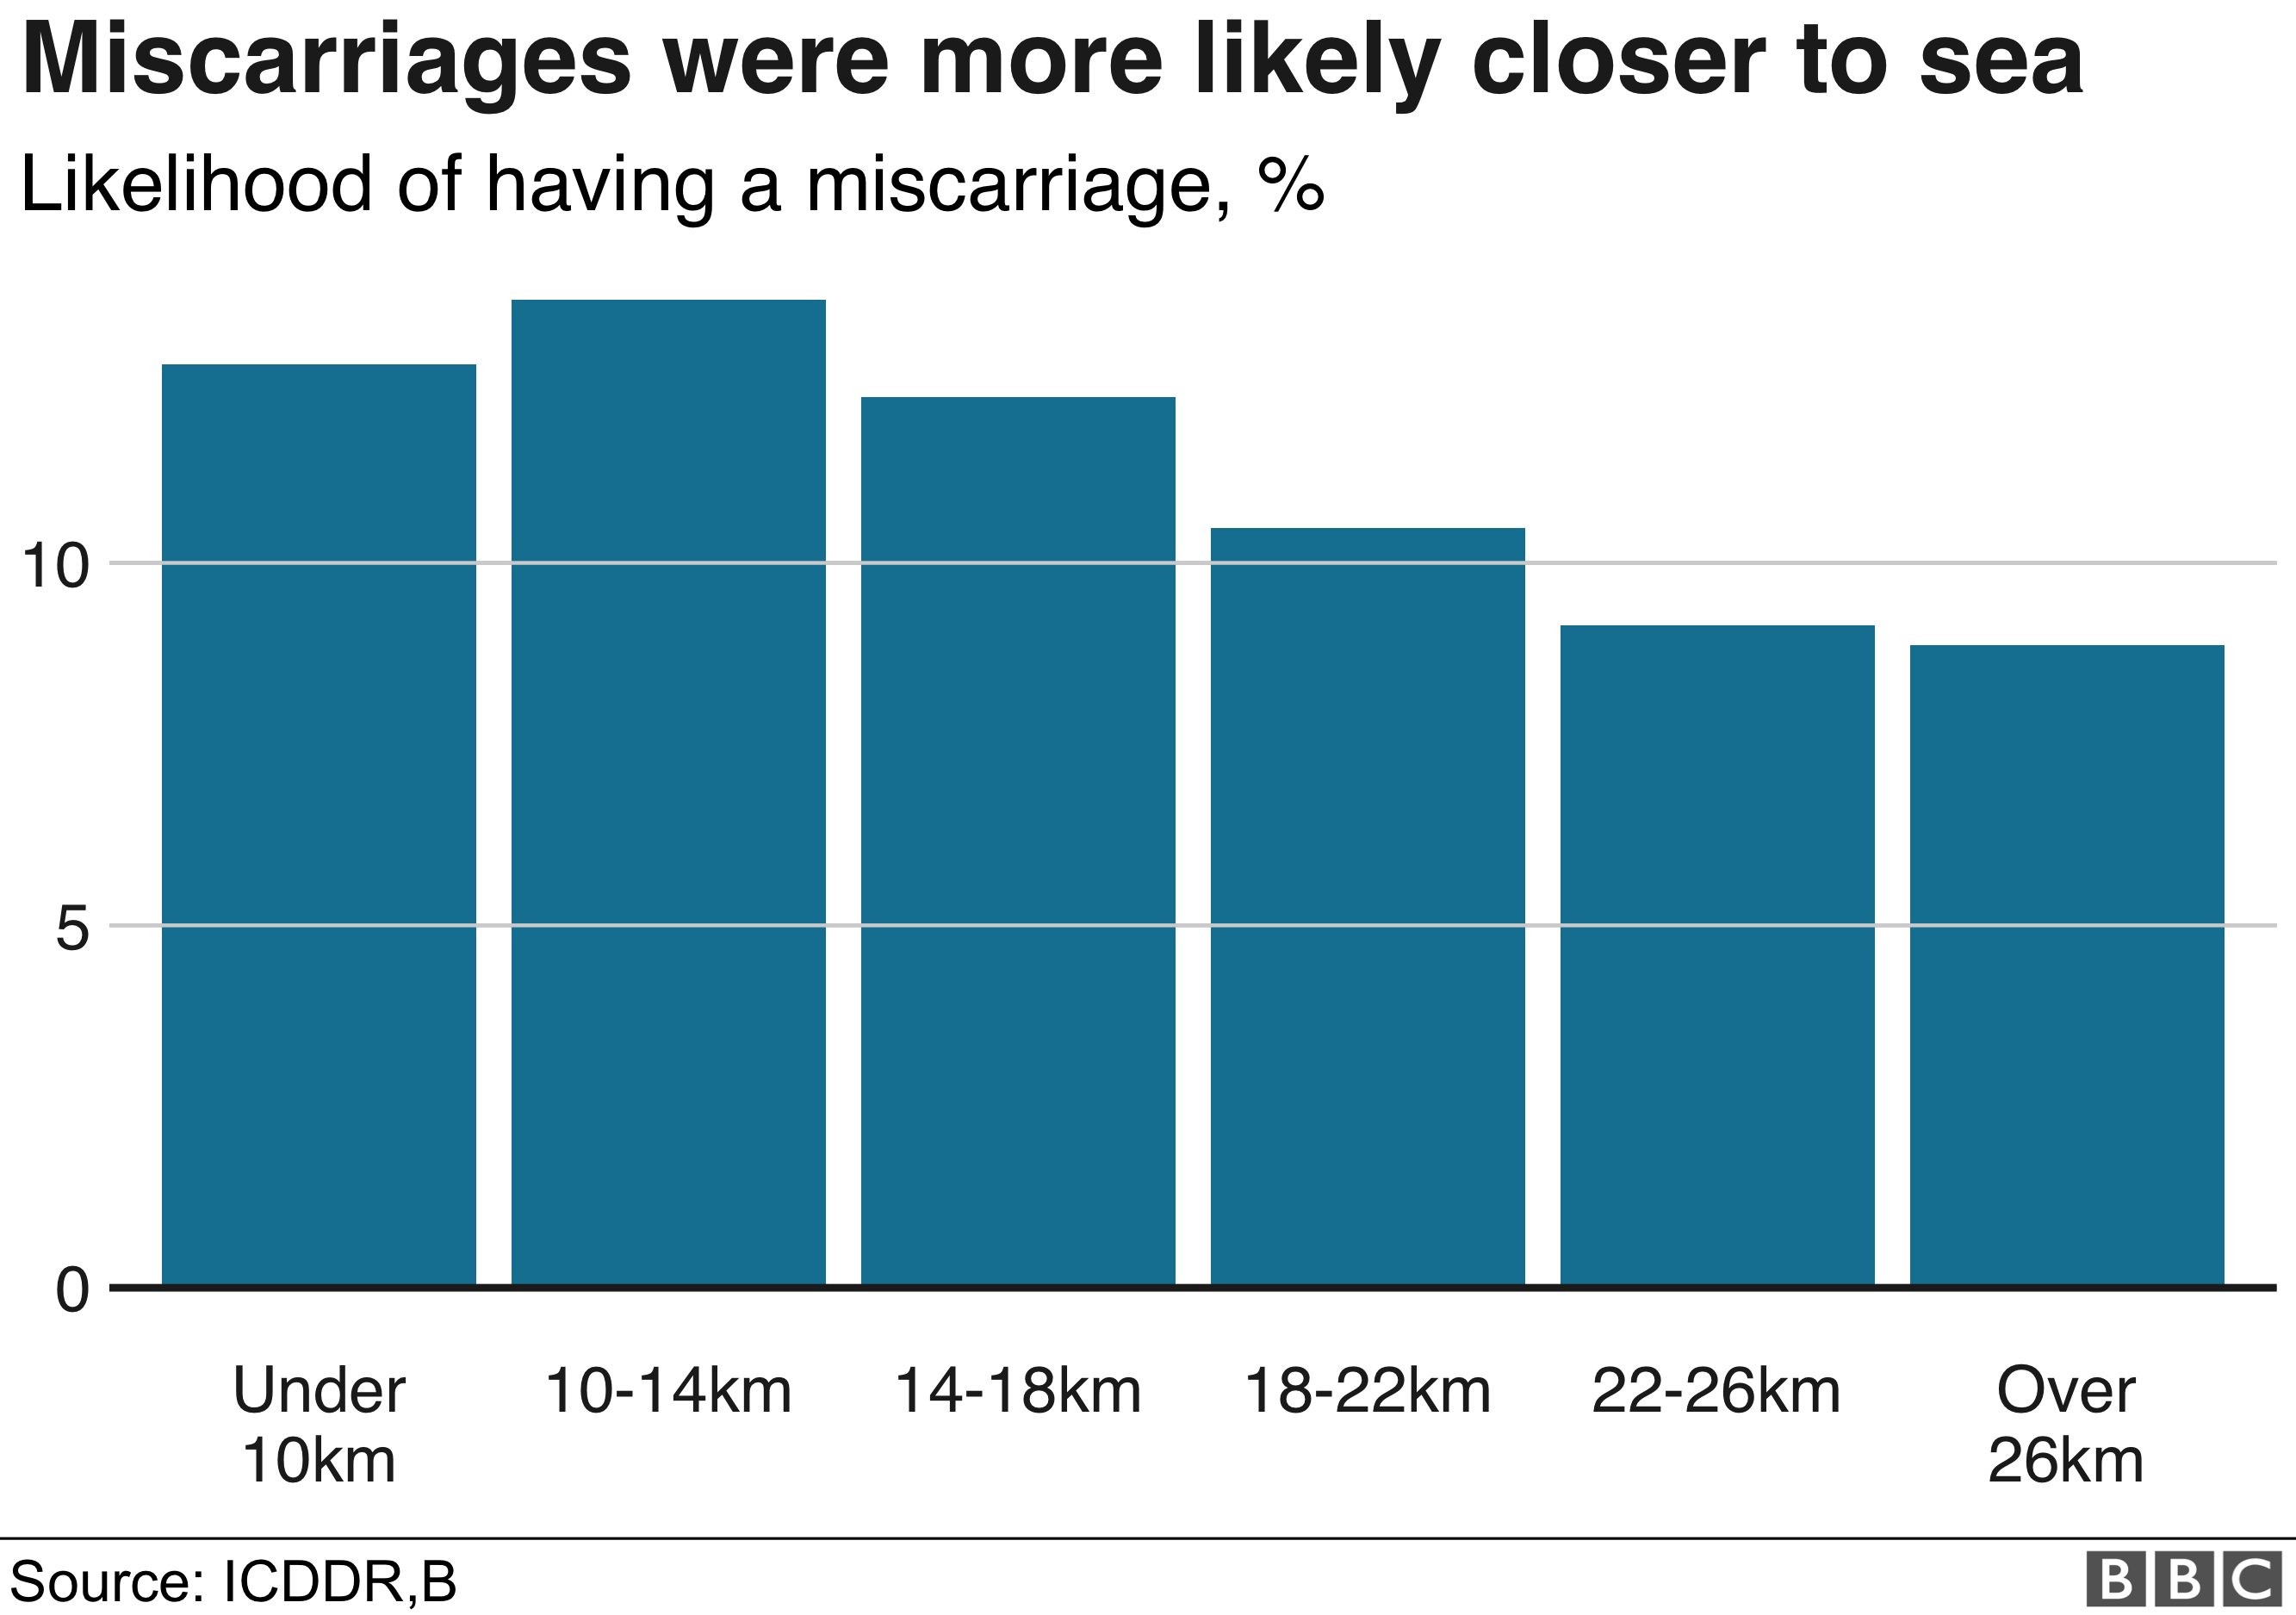 BBC Graphic of miscarriages that take place closer to seas